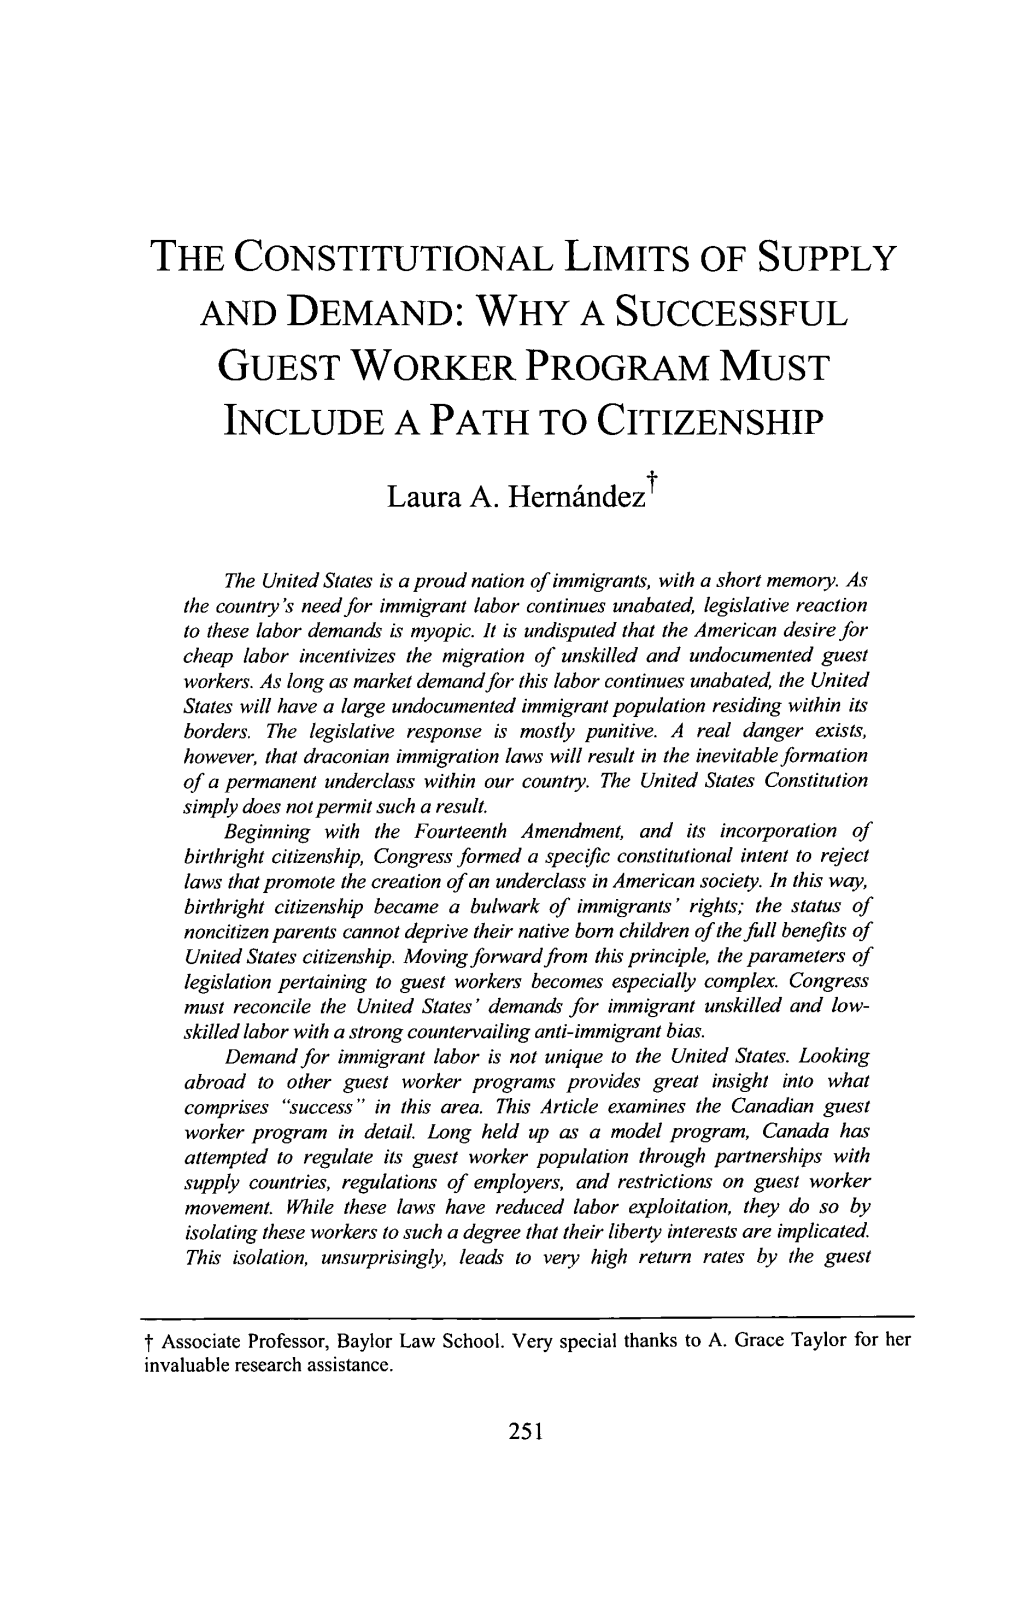 Why a Successful Guest Worker Program Must Include a Path to Citizenship